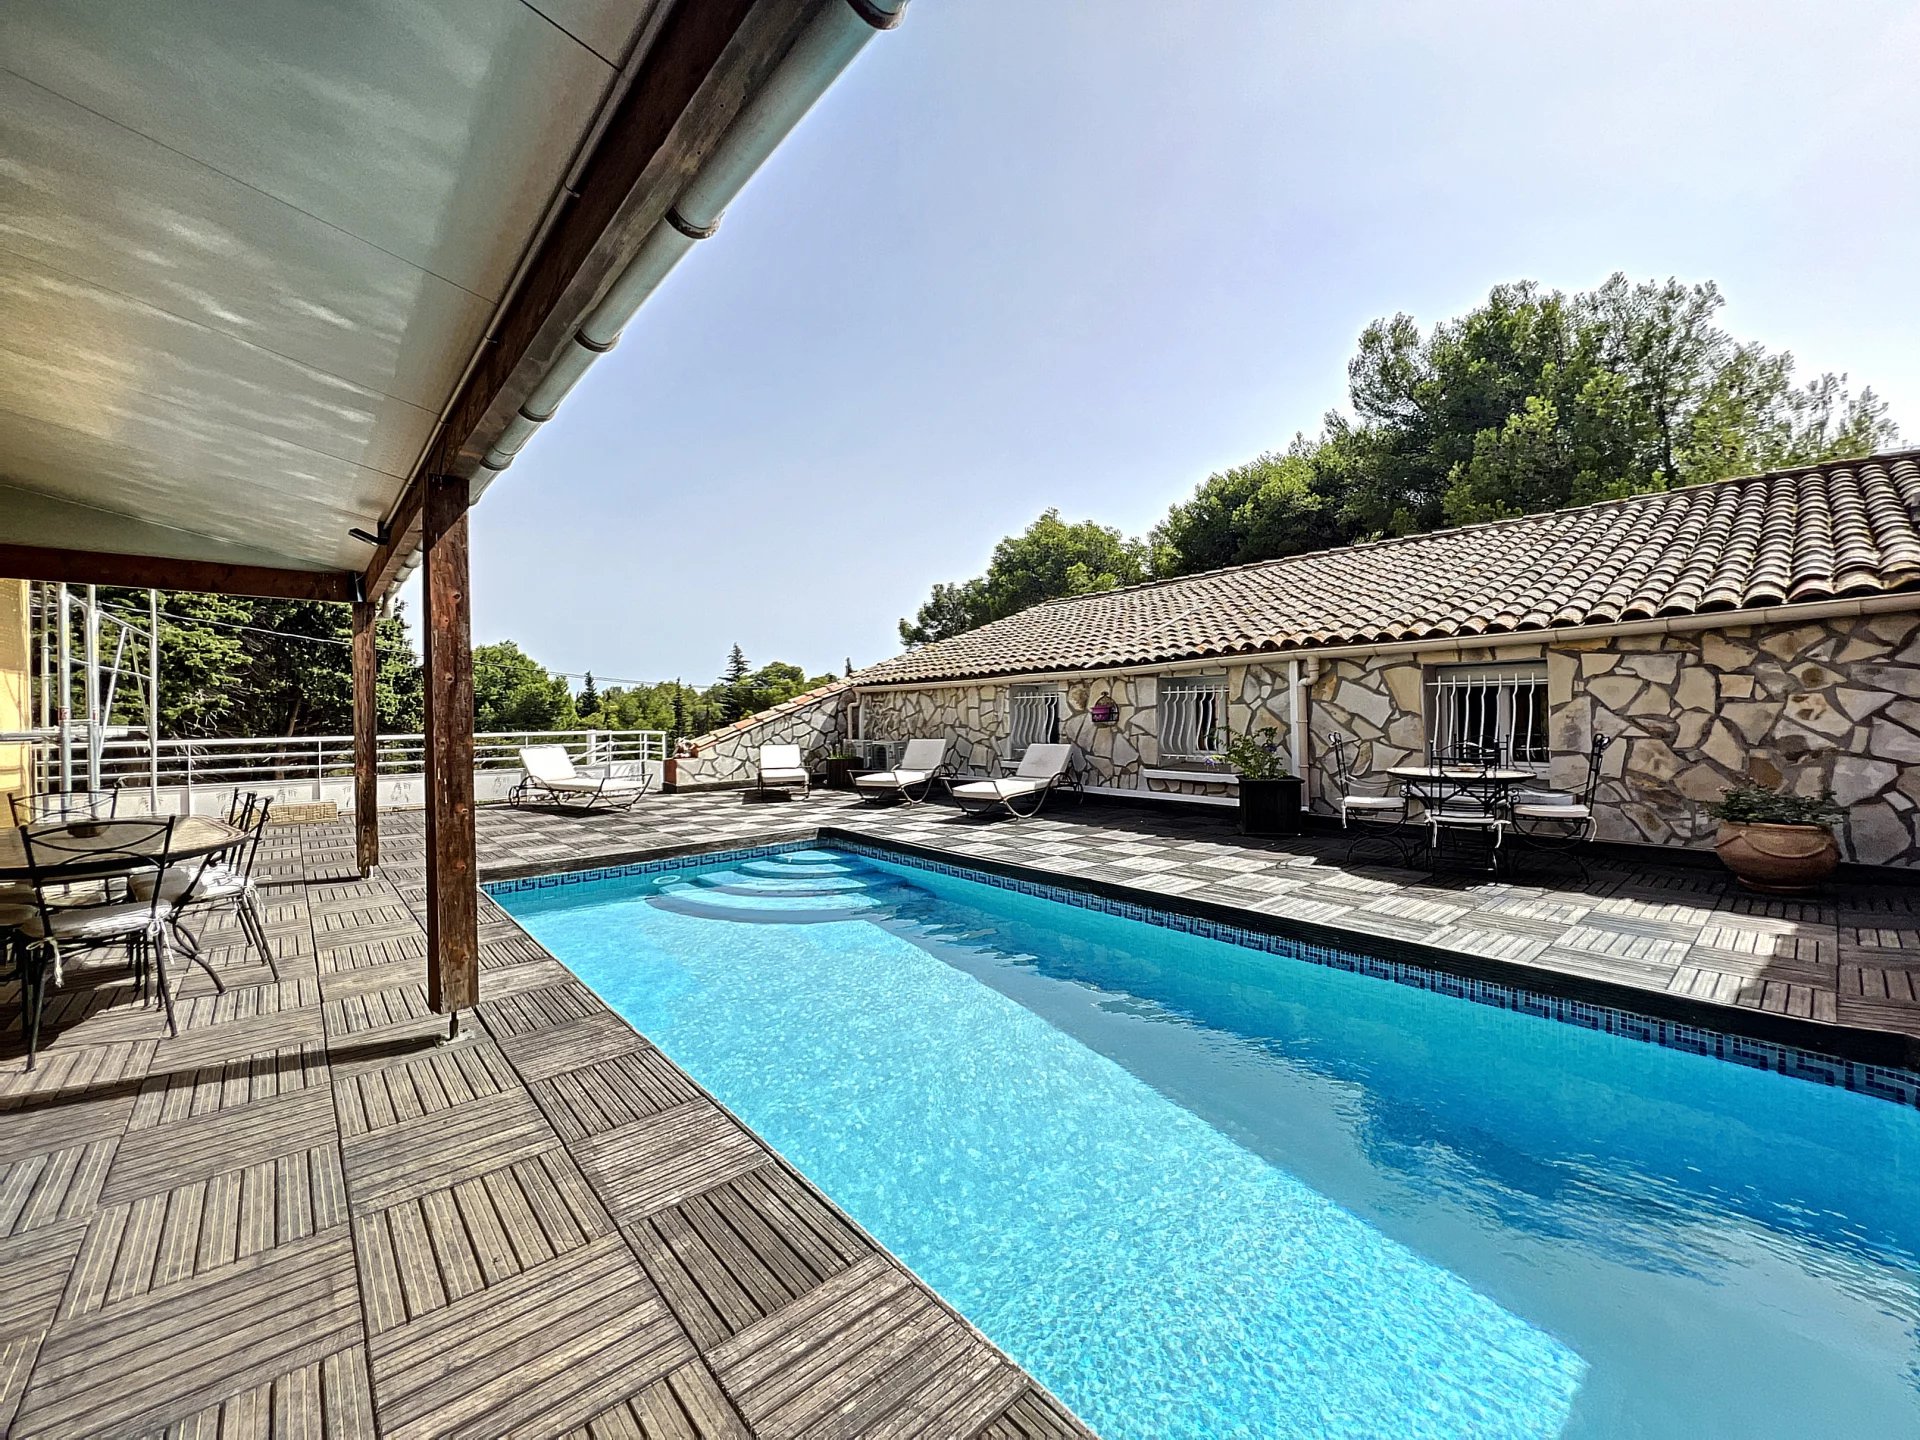 FORMER CELLAR FULLY RENOVATED WITH GARDEN, SWIMMING POOL, BAGES D'AUDE